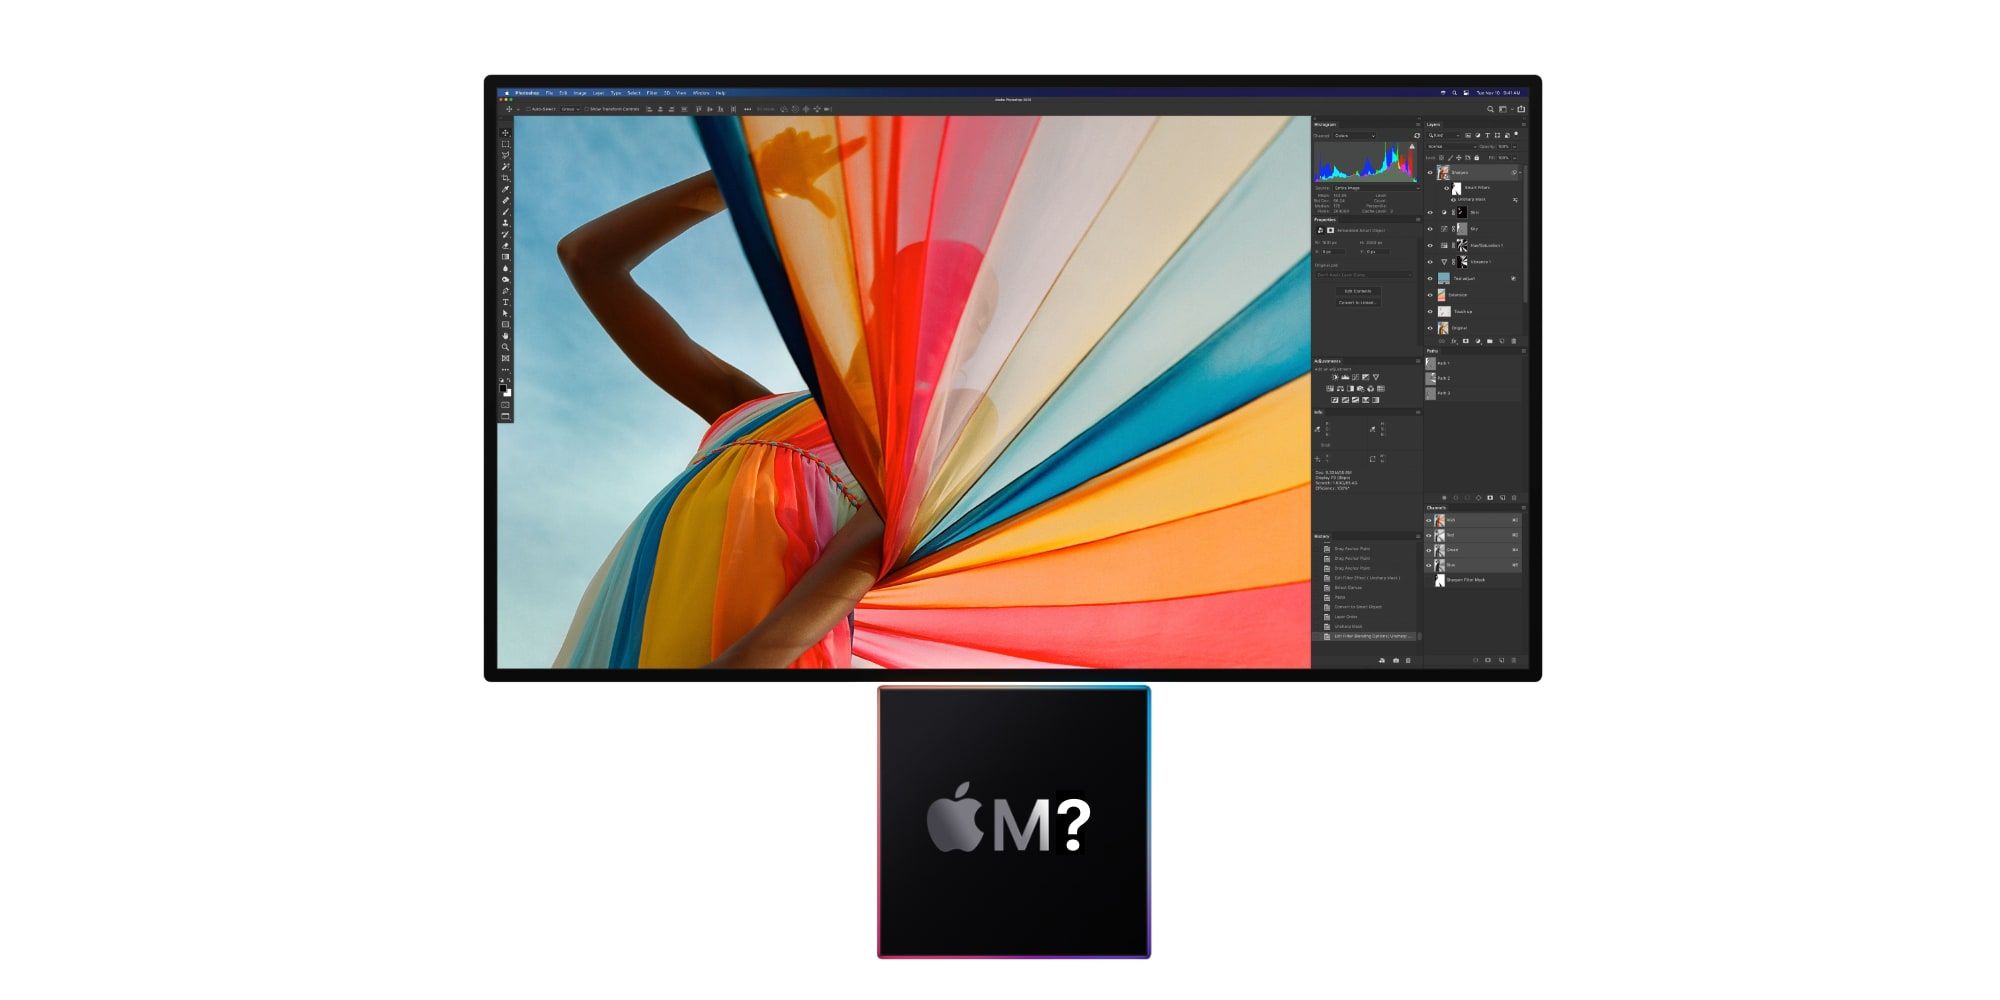 iMac Desktop Redesign Reportedly Coming Rumored Upgrades Explained